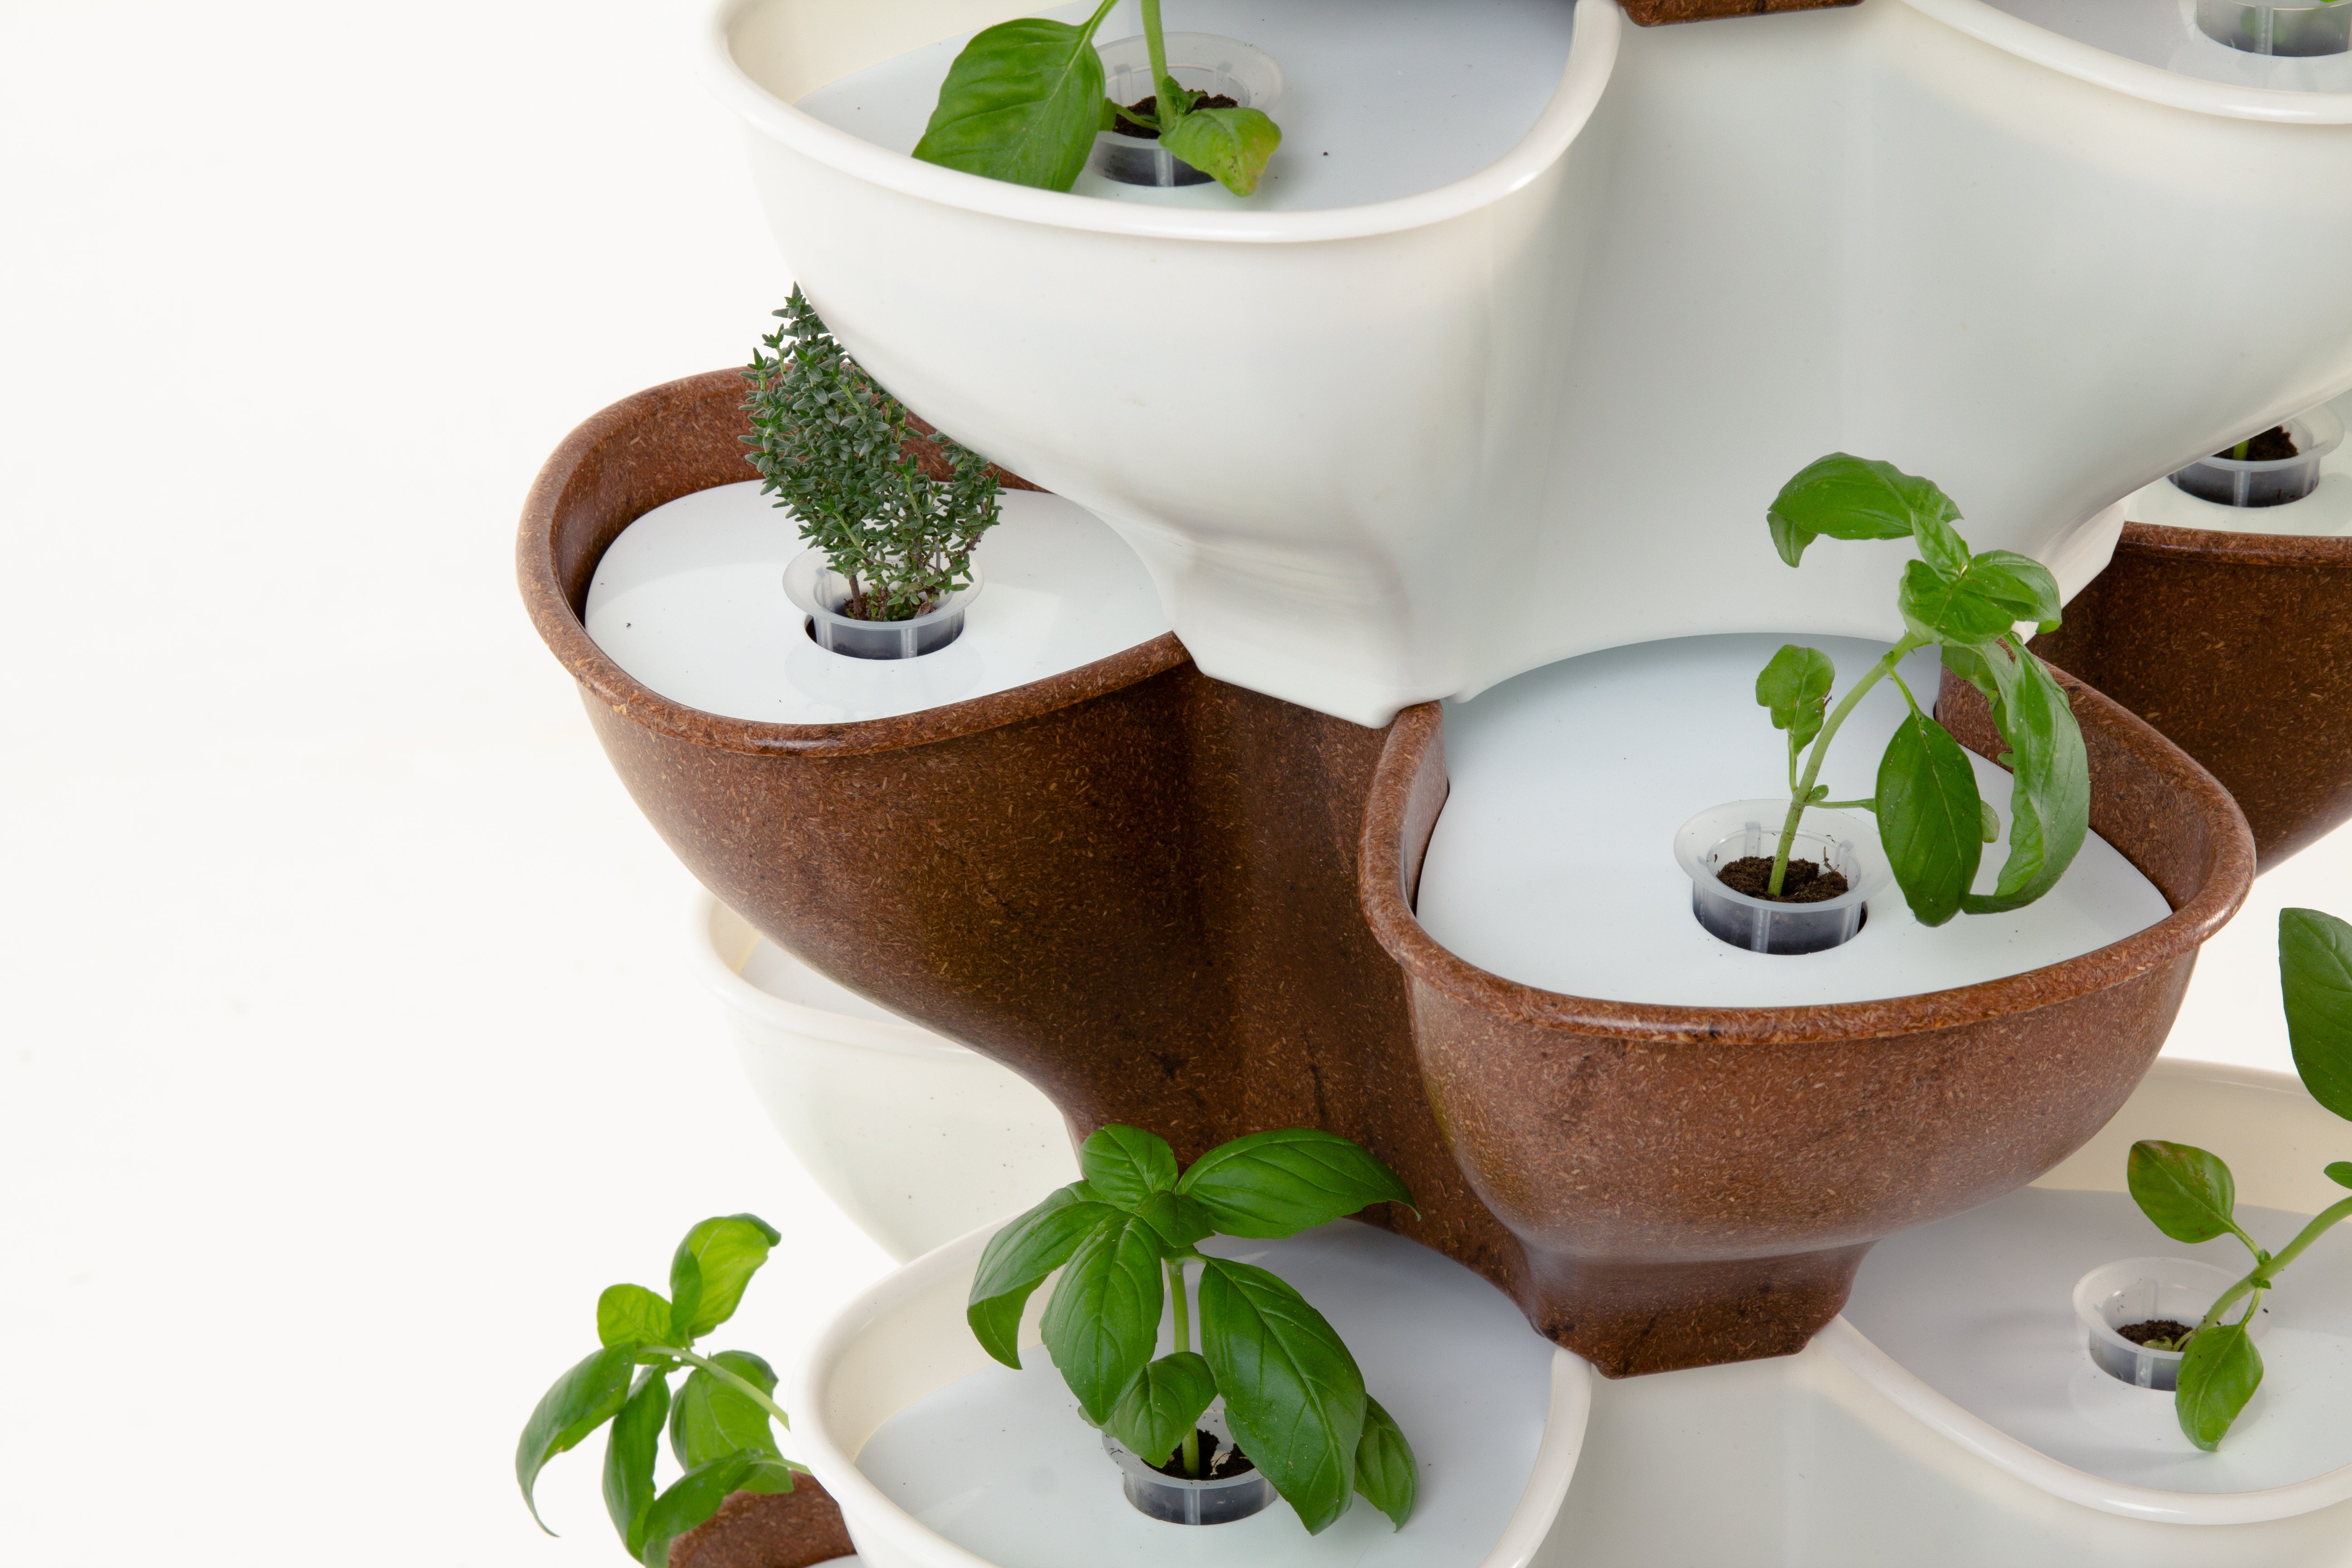 Clovy: the IoT vertical garden that teaches you to grow outdoor and indoor